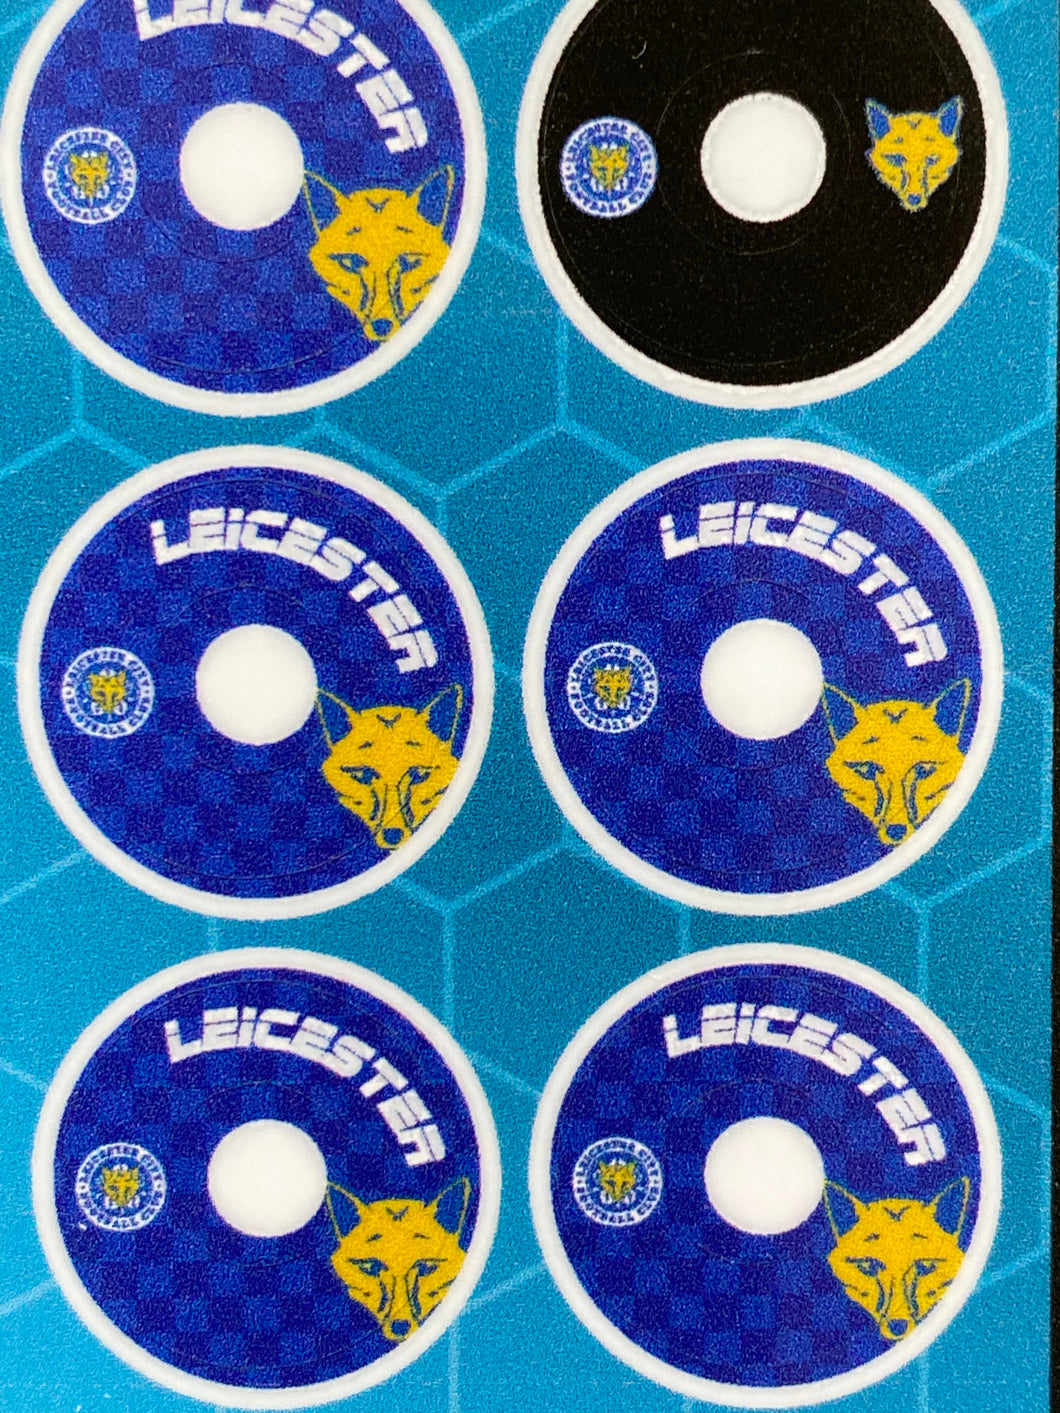 Leicester City Base Stickers